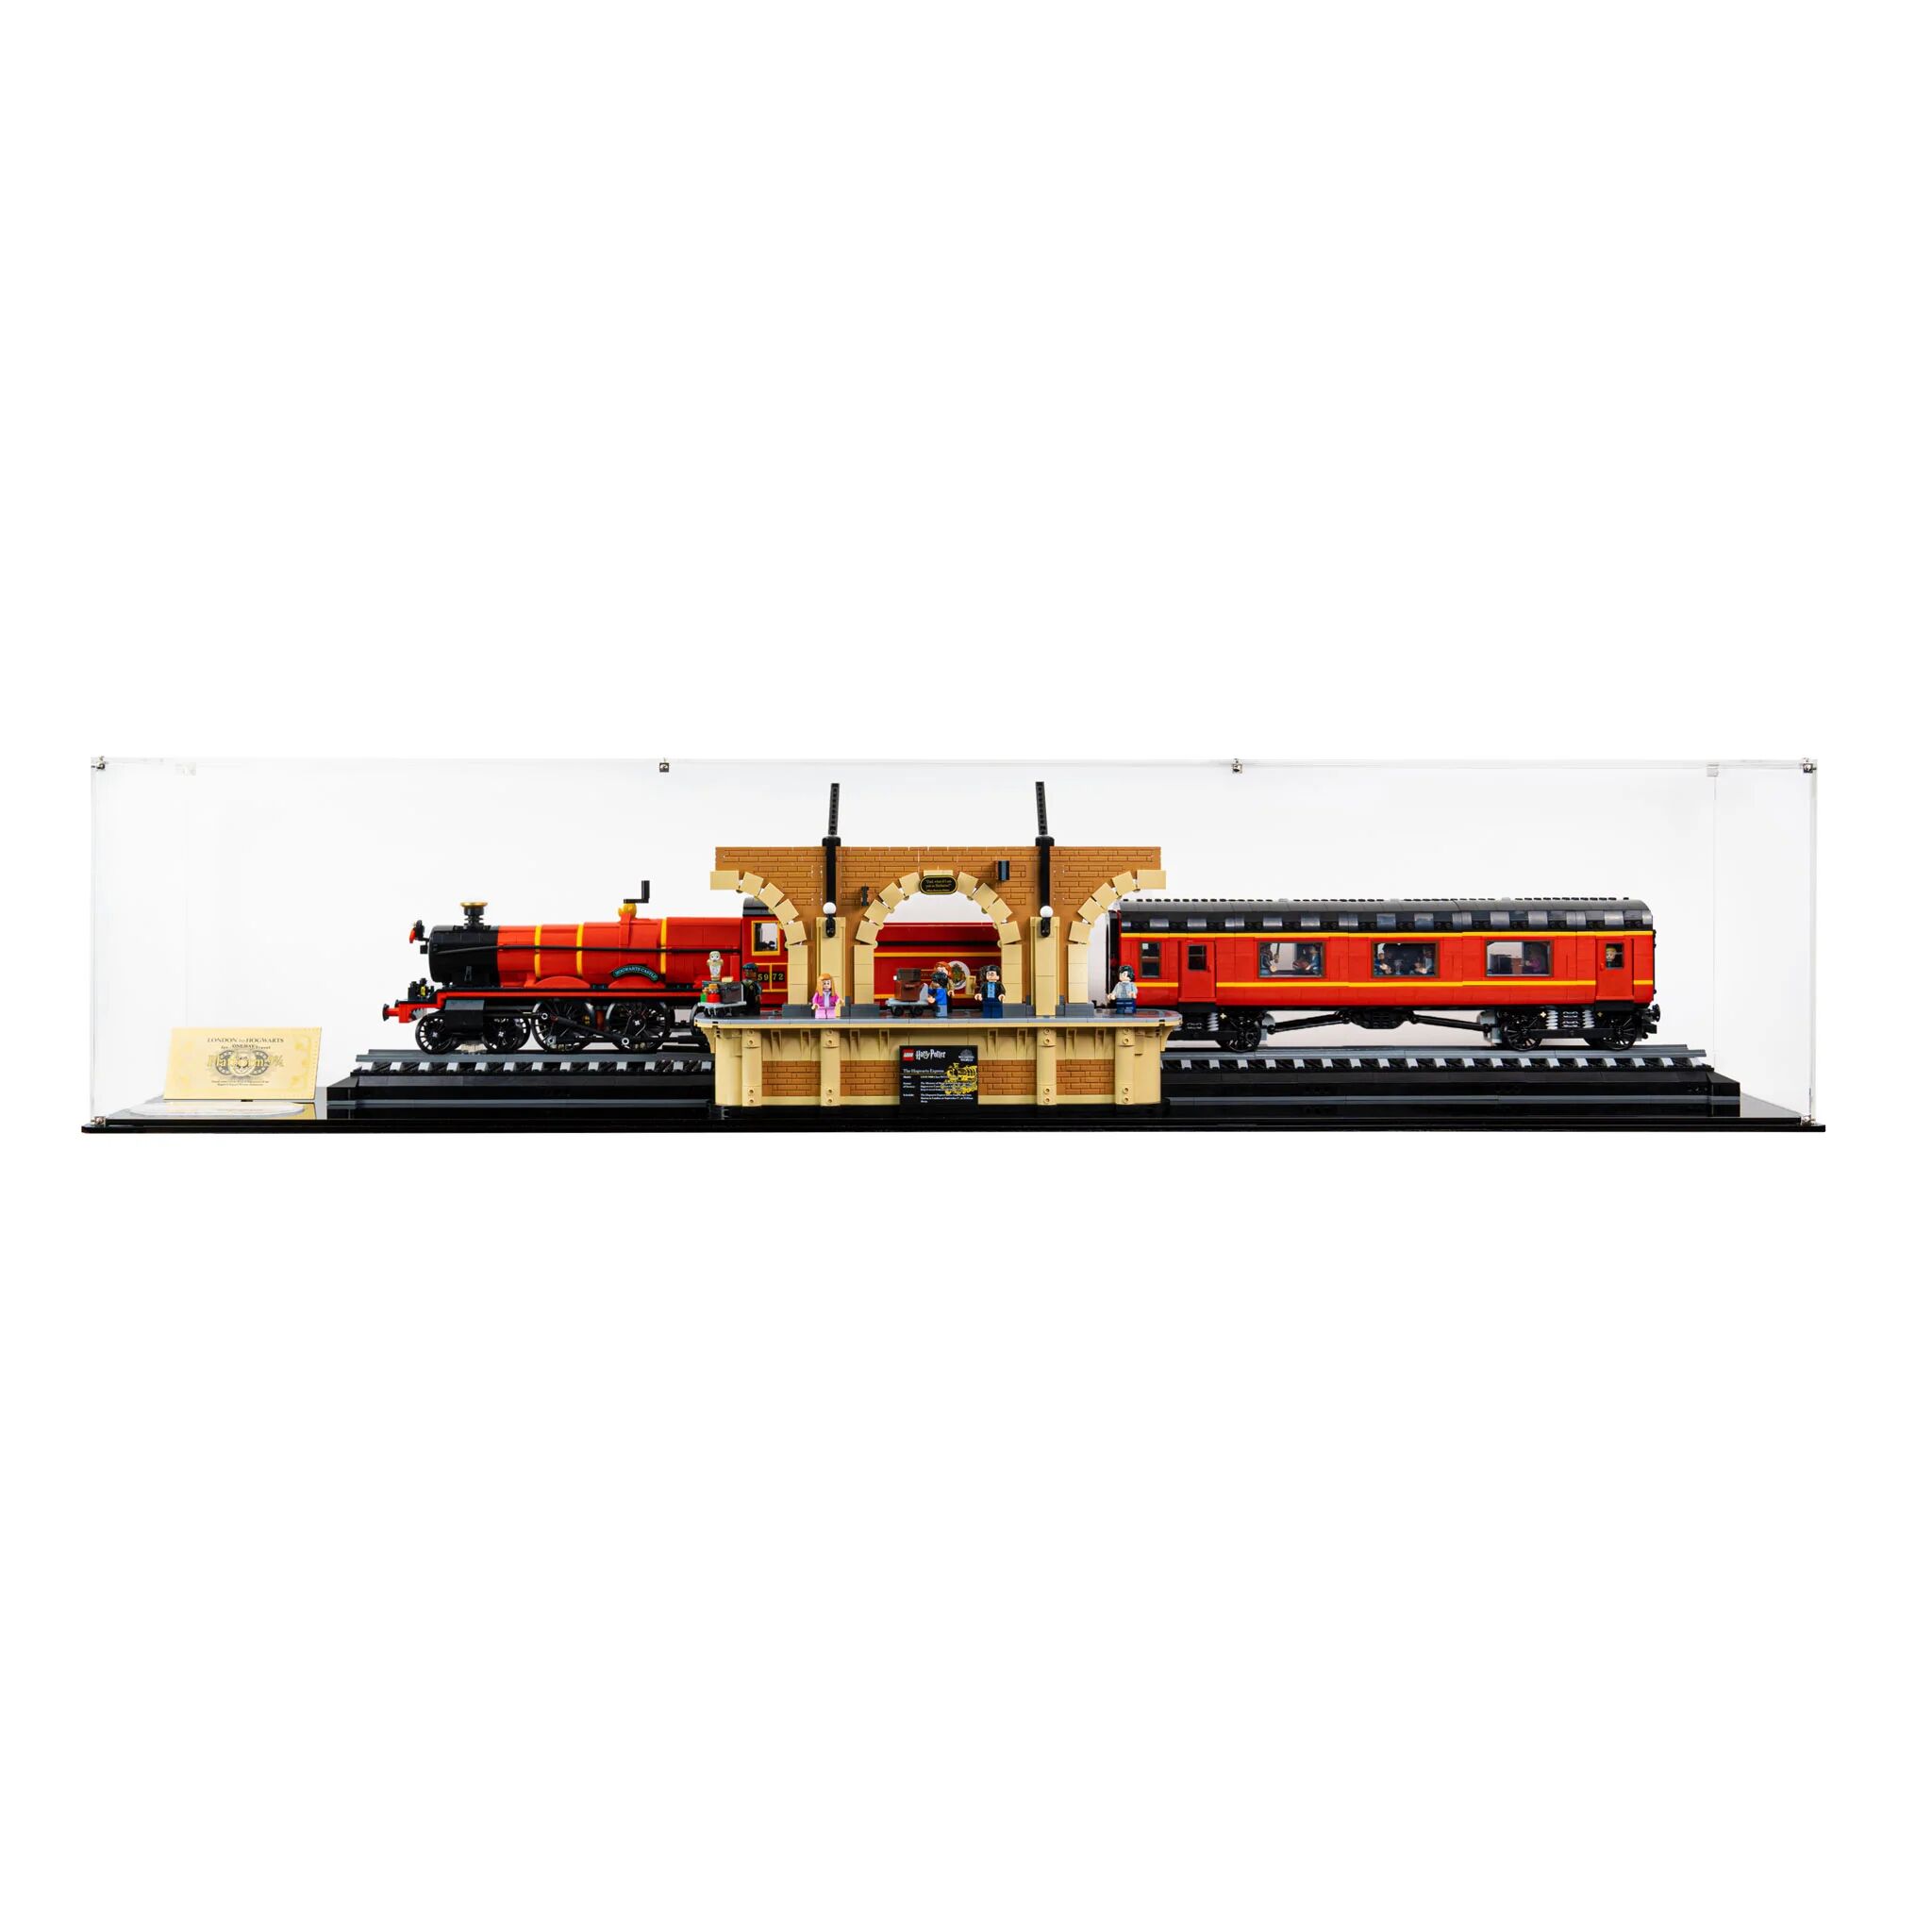 Wicked Brick Display case for LEGO® Harry Potter: Hogwarts Express™ Collectors' Edition (76405) - Display case